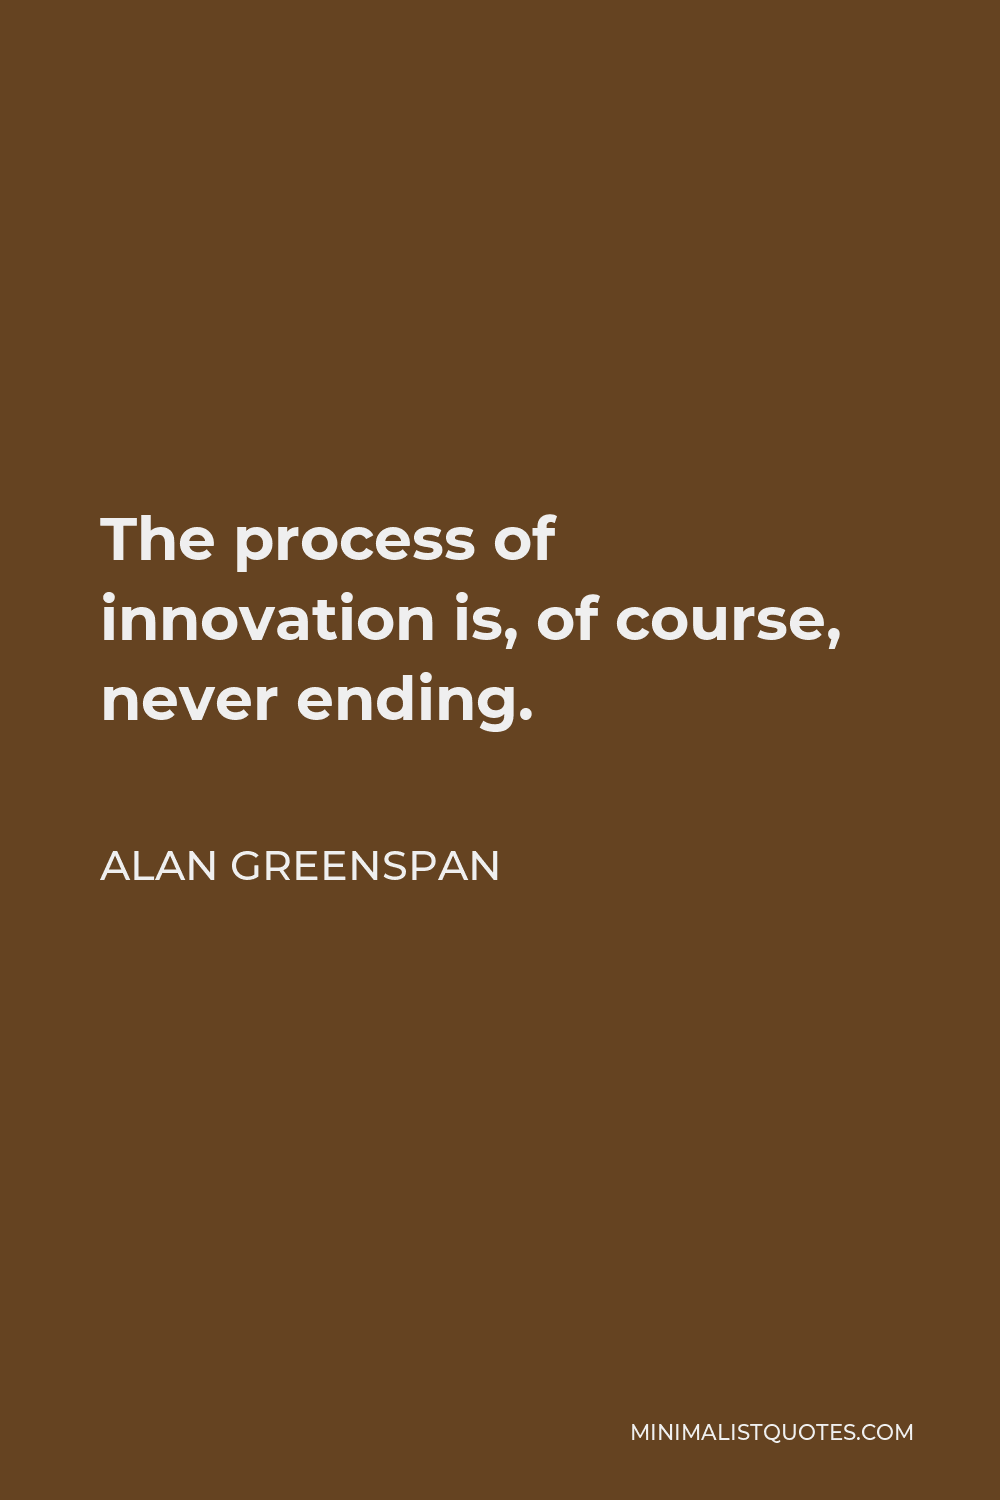 Alan Greenspan Quote - The process of innovation is, of course, never ending.